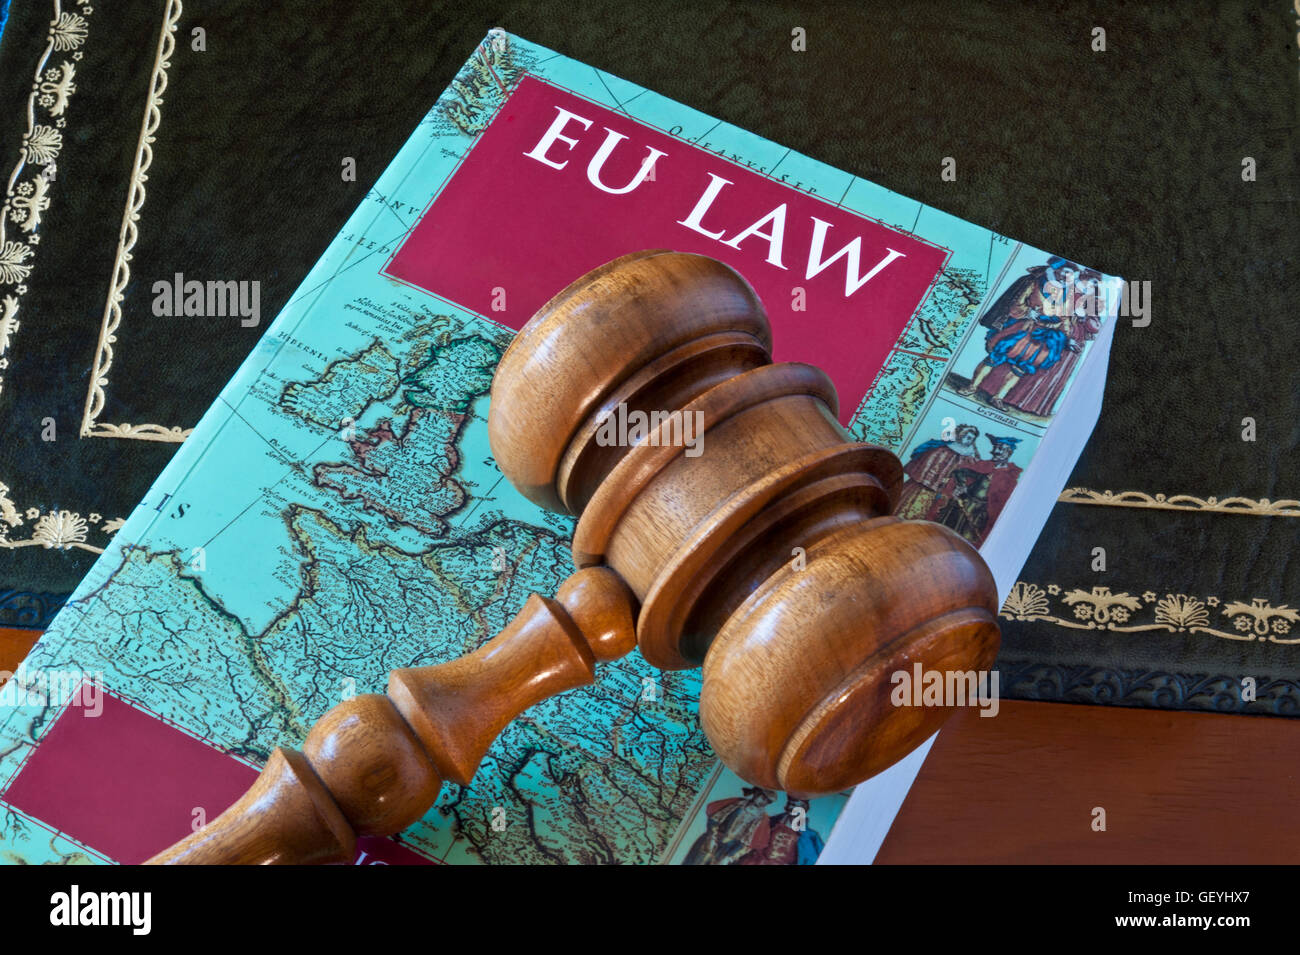 EU Law book with map of Europe front cover, on desk with judges gavel European Union Schengen agreement Law Laws Legal binding UK and Europe Stock Photo